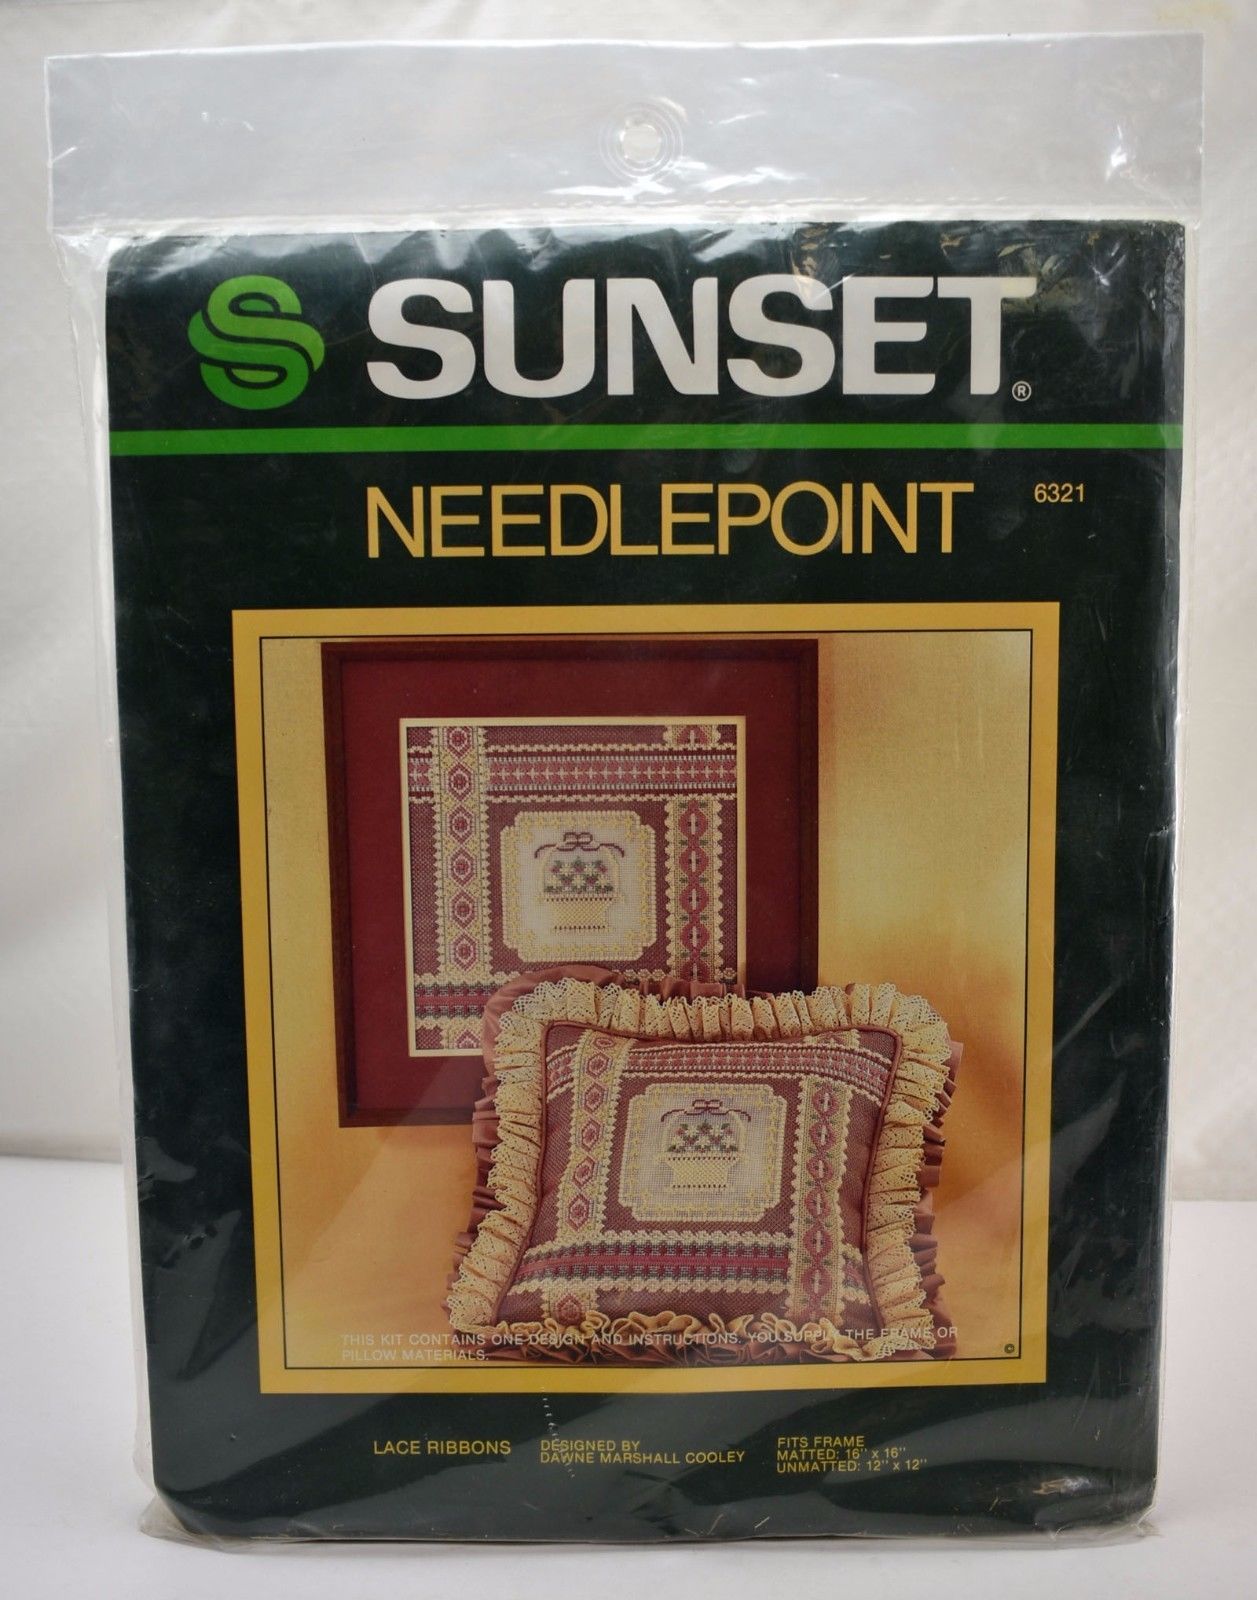 Vintage 1984 Lace Ribbons Needlepoint Kit by Sunset - 12" x 12" Pillow or Frame - $33.20